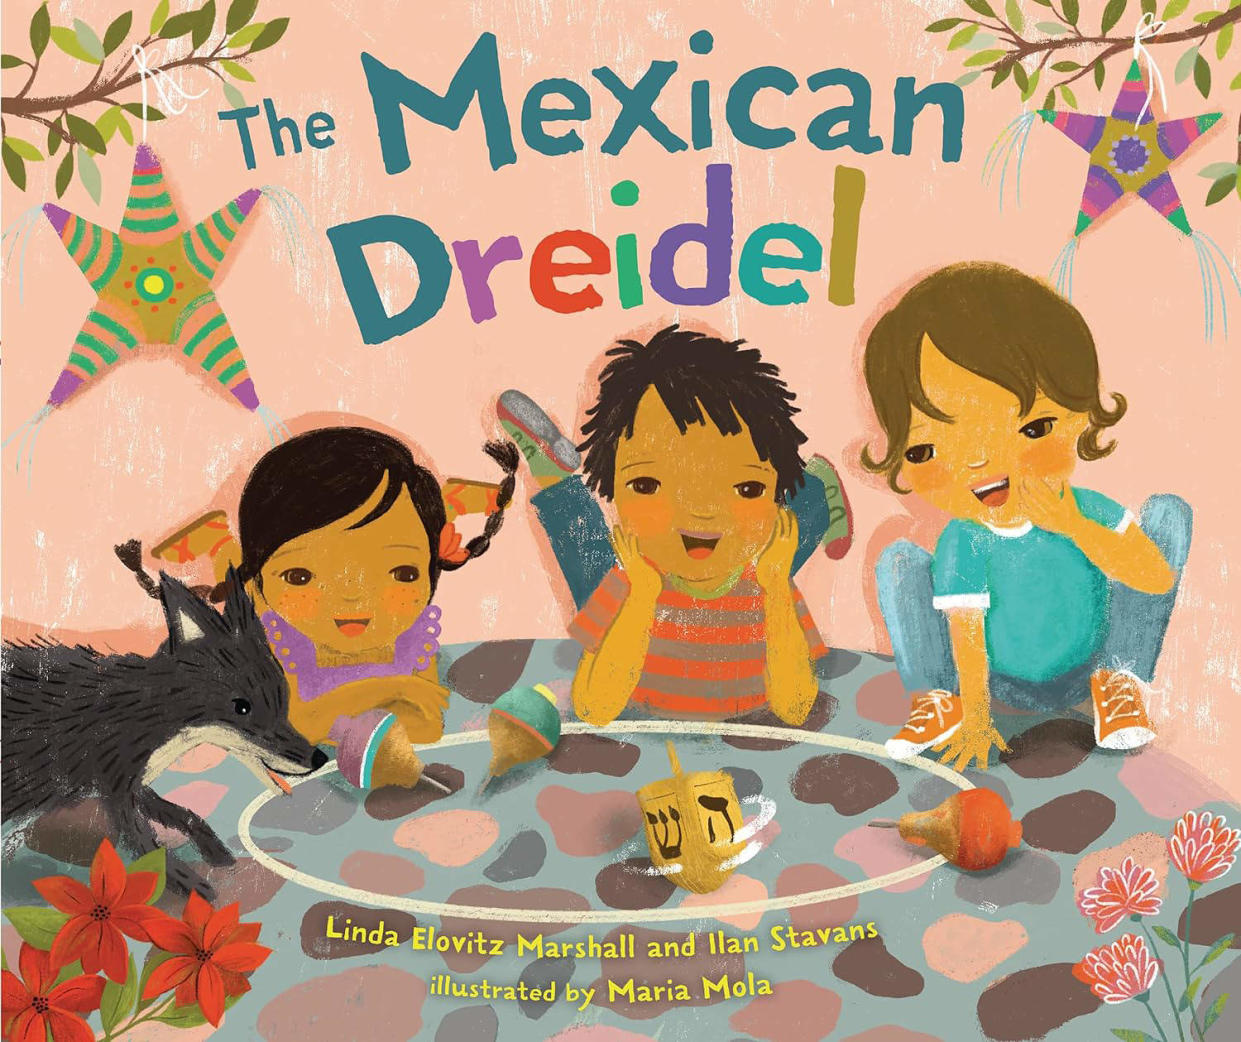 The Mexican Dreidel book cover. (Lerner Publishing Group)